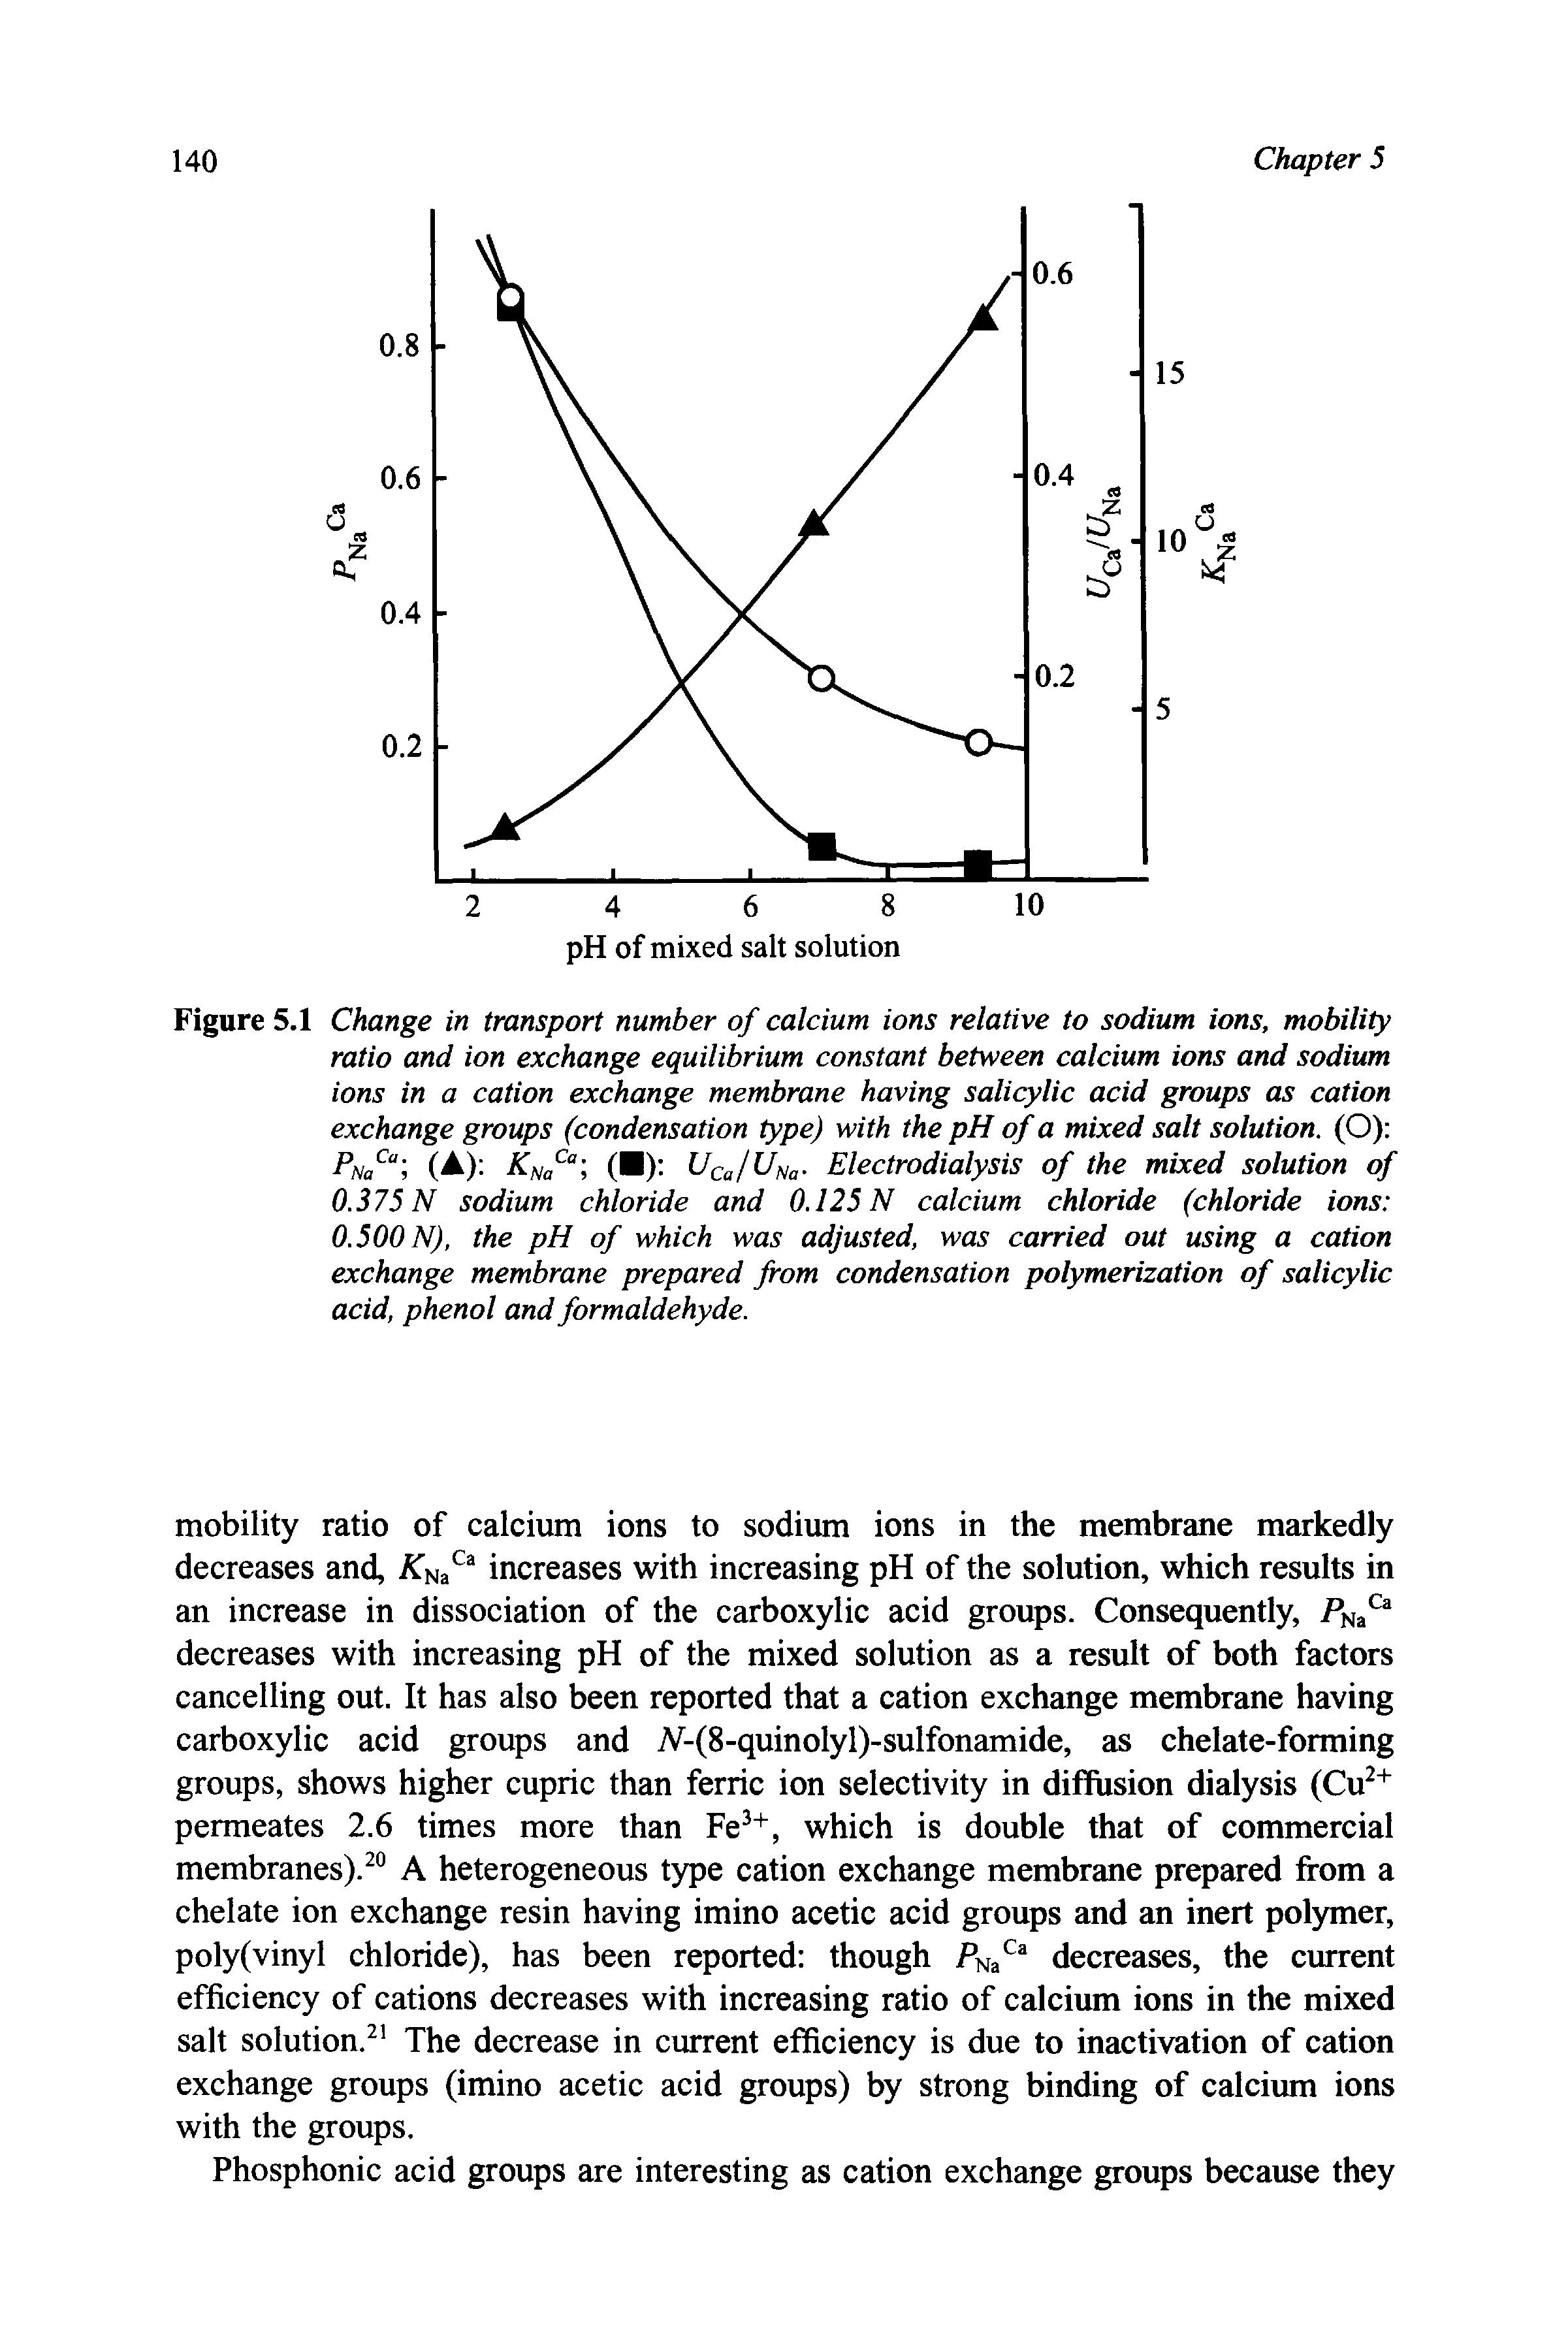 Figure 5.1 Change in transport number of calcium ions relative to sodium ions, mobility ratio and ion exchange equilibrium constant between calcium ions and sodium ions in a cation exchange membrane having salicylic acid groups as cation exchange groups (condensation type) with the pH of a mixed salt solution. (O) PNaC i (A) KNaCa ( ) UCu/UNa. Electrodialysis of the mixed solution of 0.375 N sodium chloride and 0.125 N calcium chloride (chloride ions 0.500 N), the pH of which was adjusted, was carried out using a cation exchange membrane prepared from condensation polymerization of salicylic acid, phenol and formaldehyde.